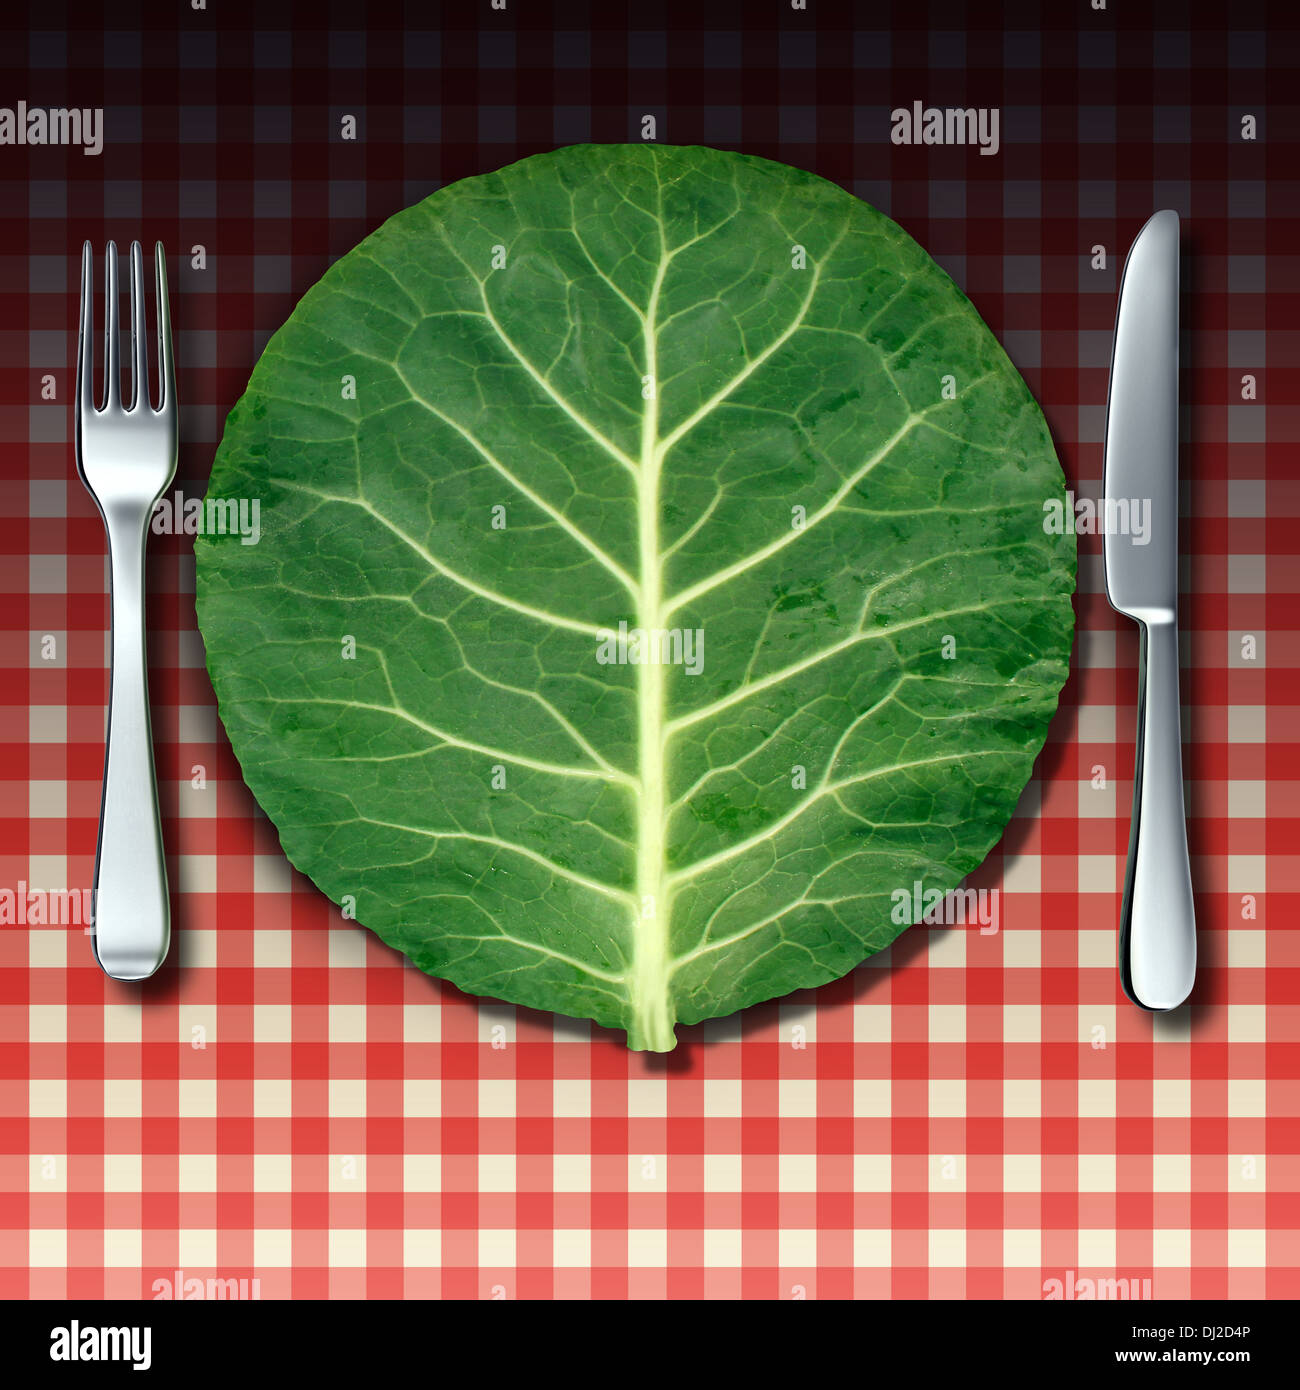 Vegetarian cuisine as a healthy lifestyle food concept with a fork and knife place setting as a green vegetable leaf shaped as a dinner plate on a checkered restaurant table cloth as a metaphor for market fresh nutritious cooking. Stock Photo